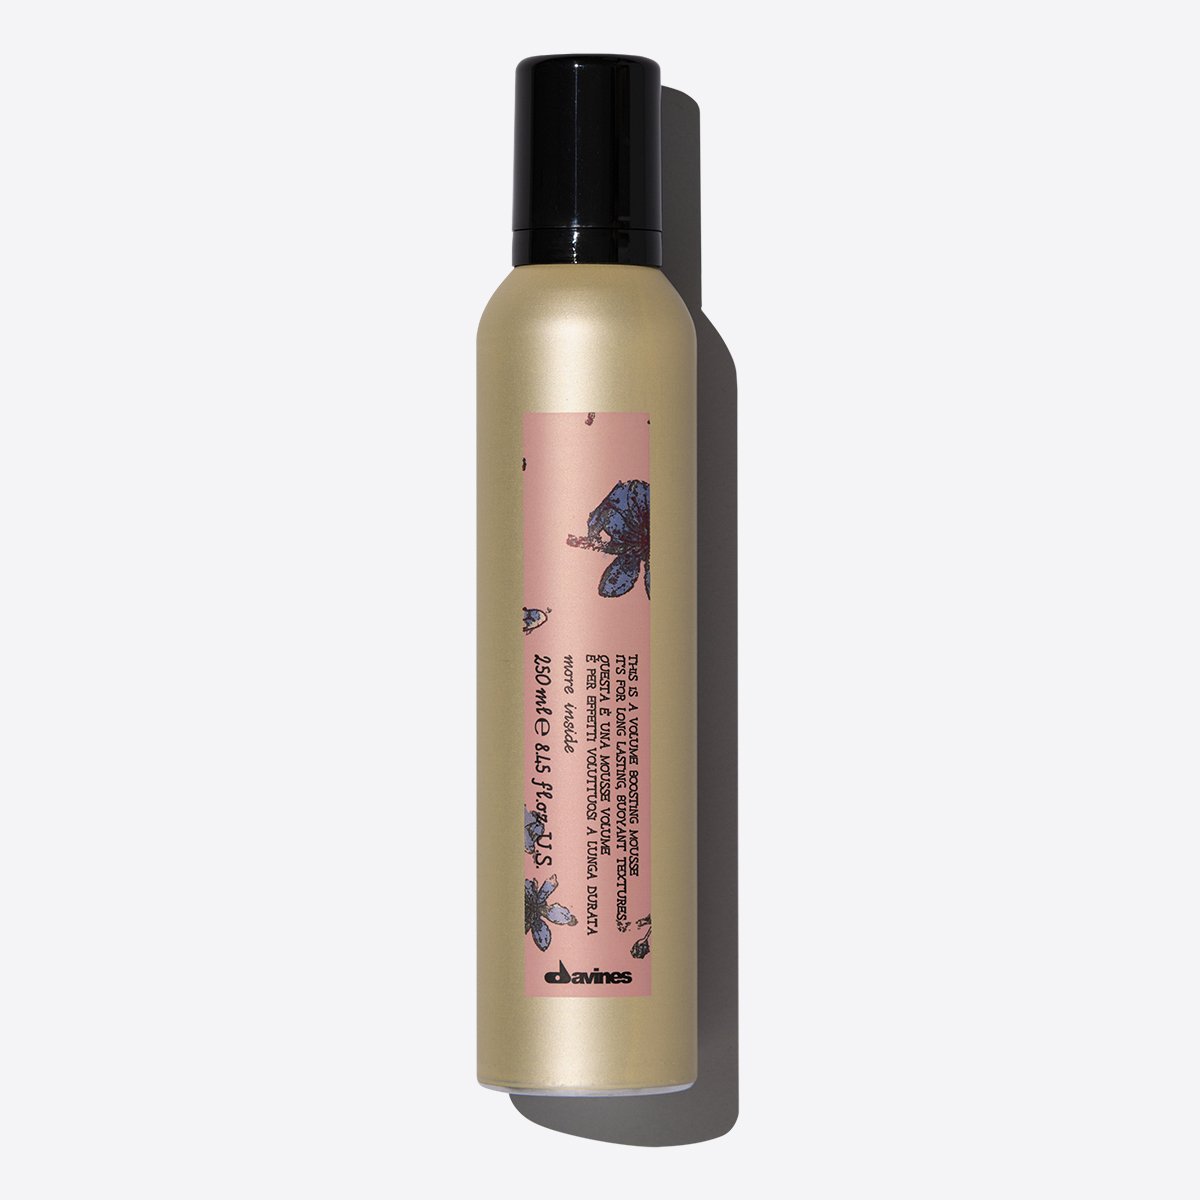 This is a Volume Boosting Mousse by Davines